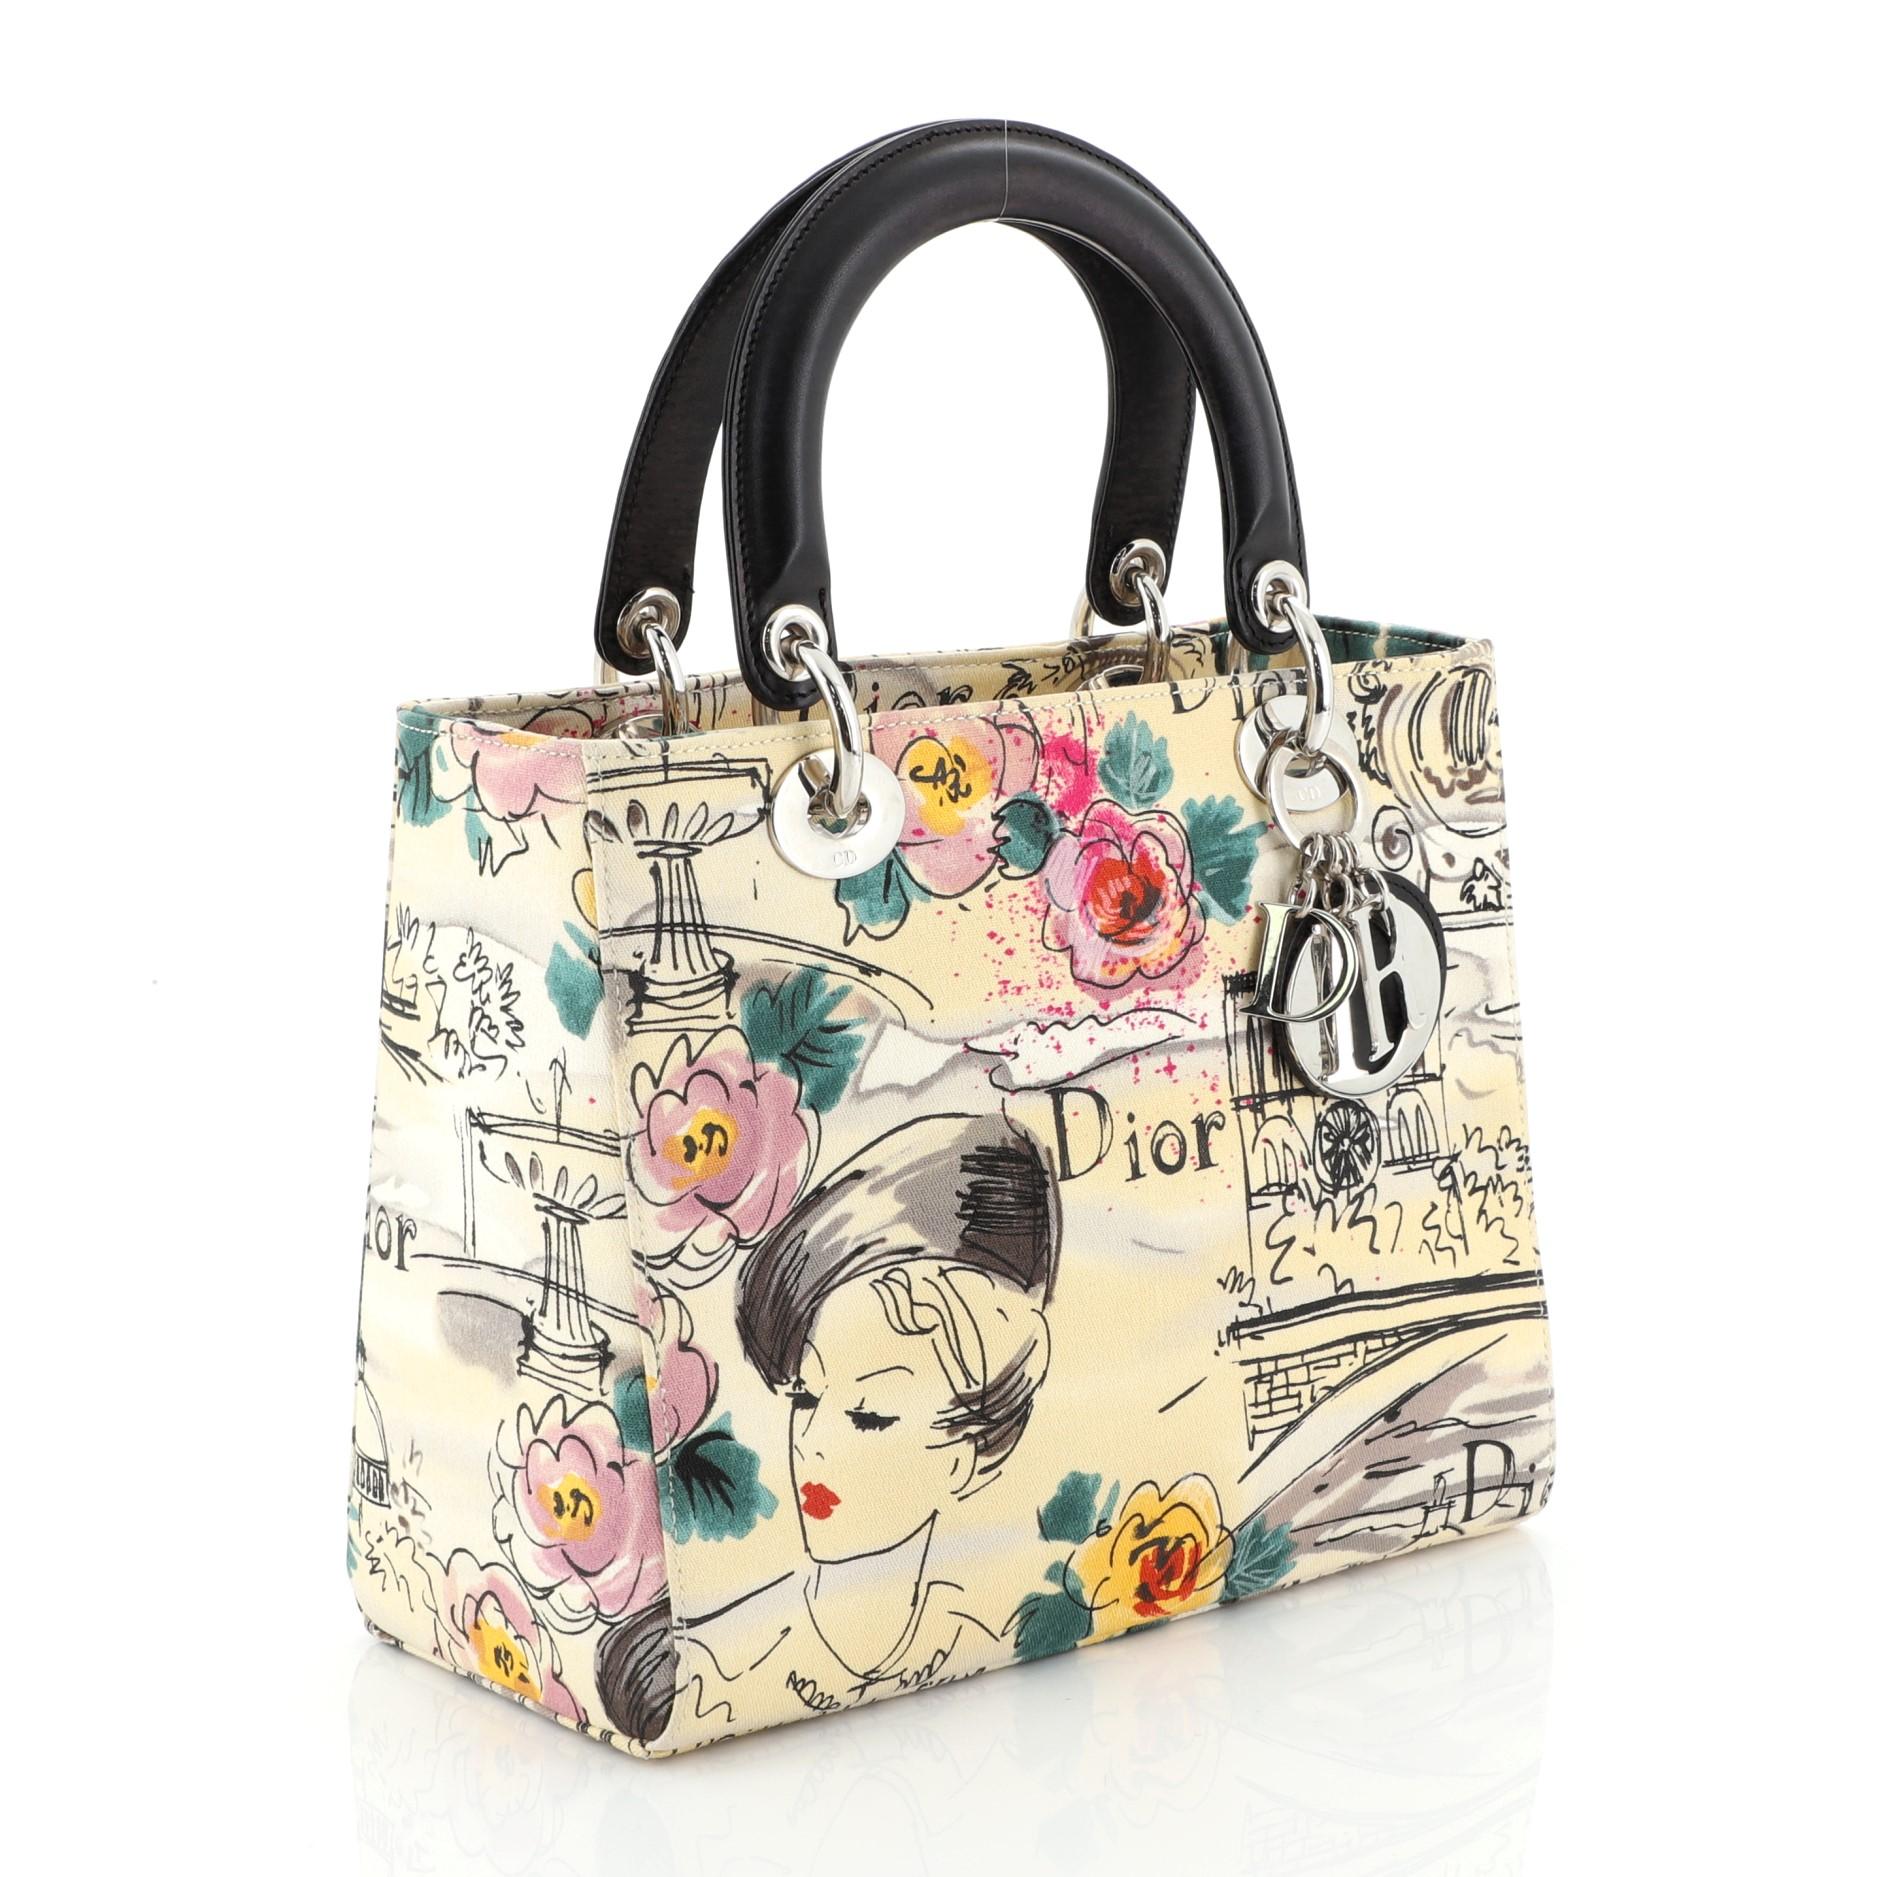 This Christian Dior Vintage Lady Dior Bag Printed Canvas Medium is a classic bag also known as the princess bag inspired by Princess Diana. Crafted from yellow printed canvas, it features dual top handles with Dior charms and silver-tone hardware.